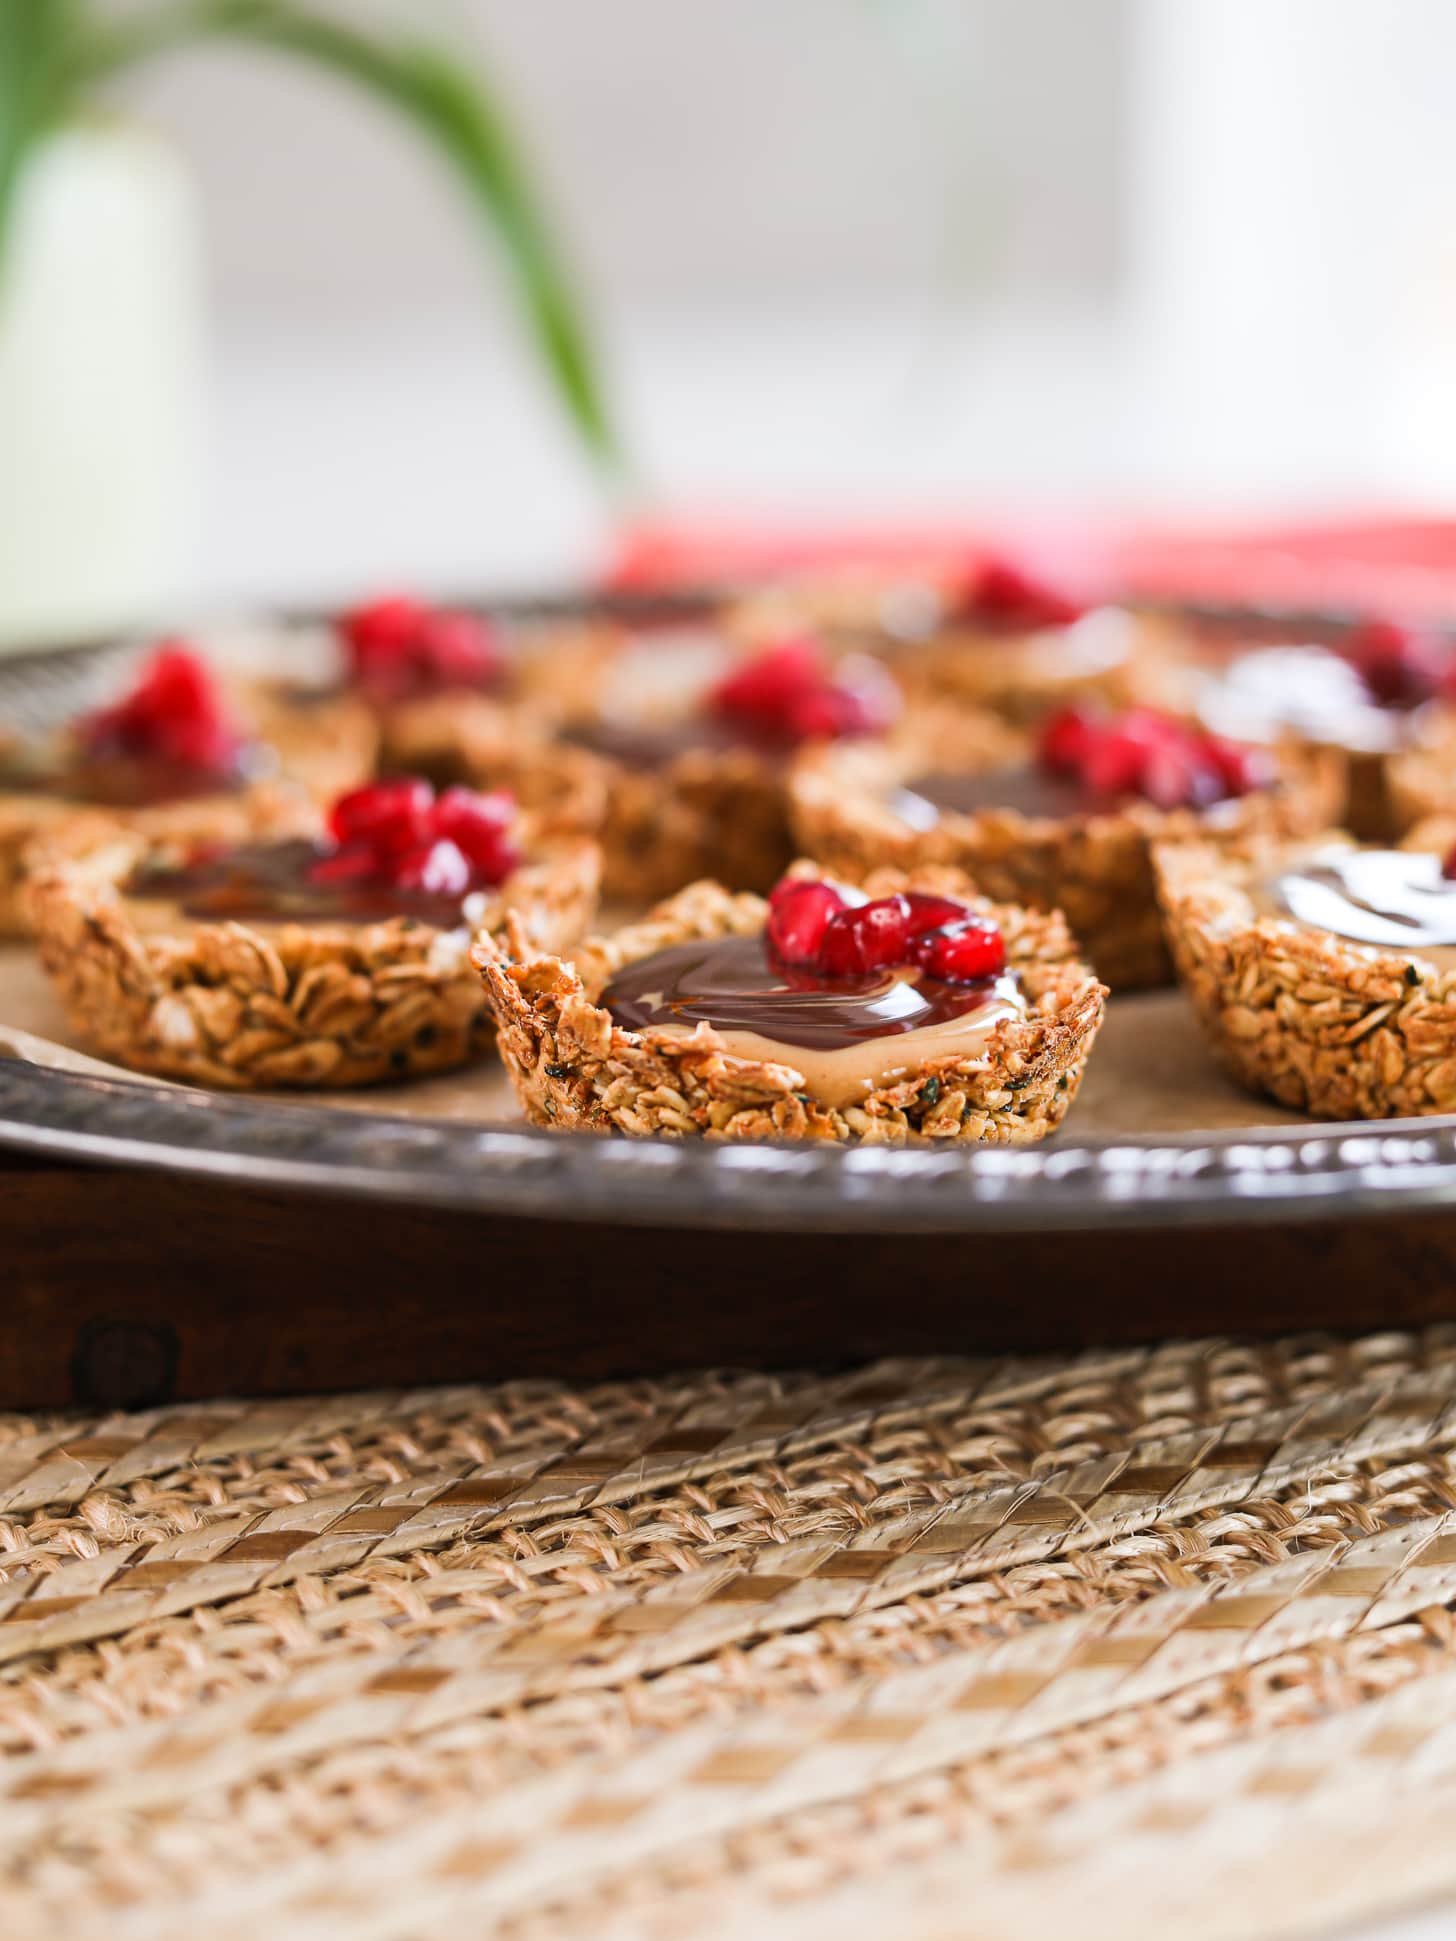 A perspective shot of a tray holding oat cup cookies that are filled with peanut butter and chocolate and topped with pomegranate kernels.